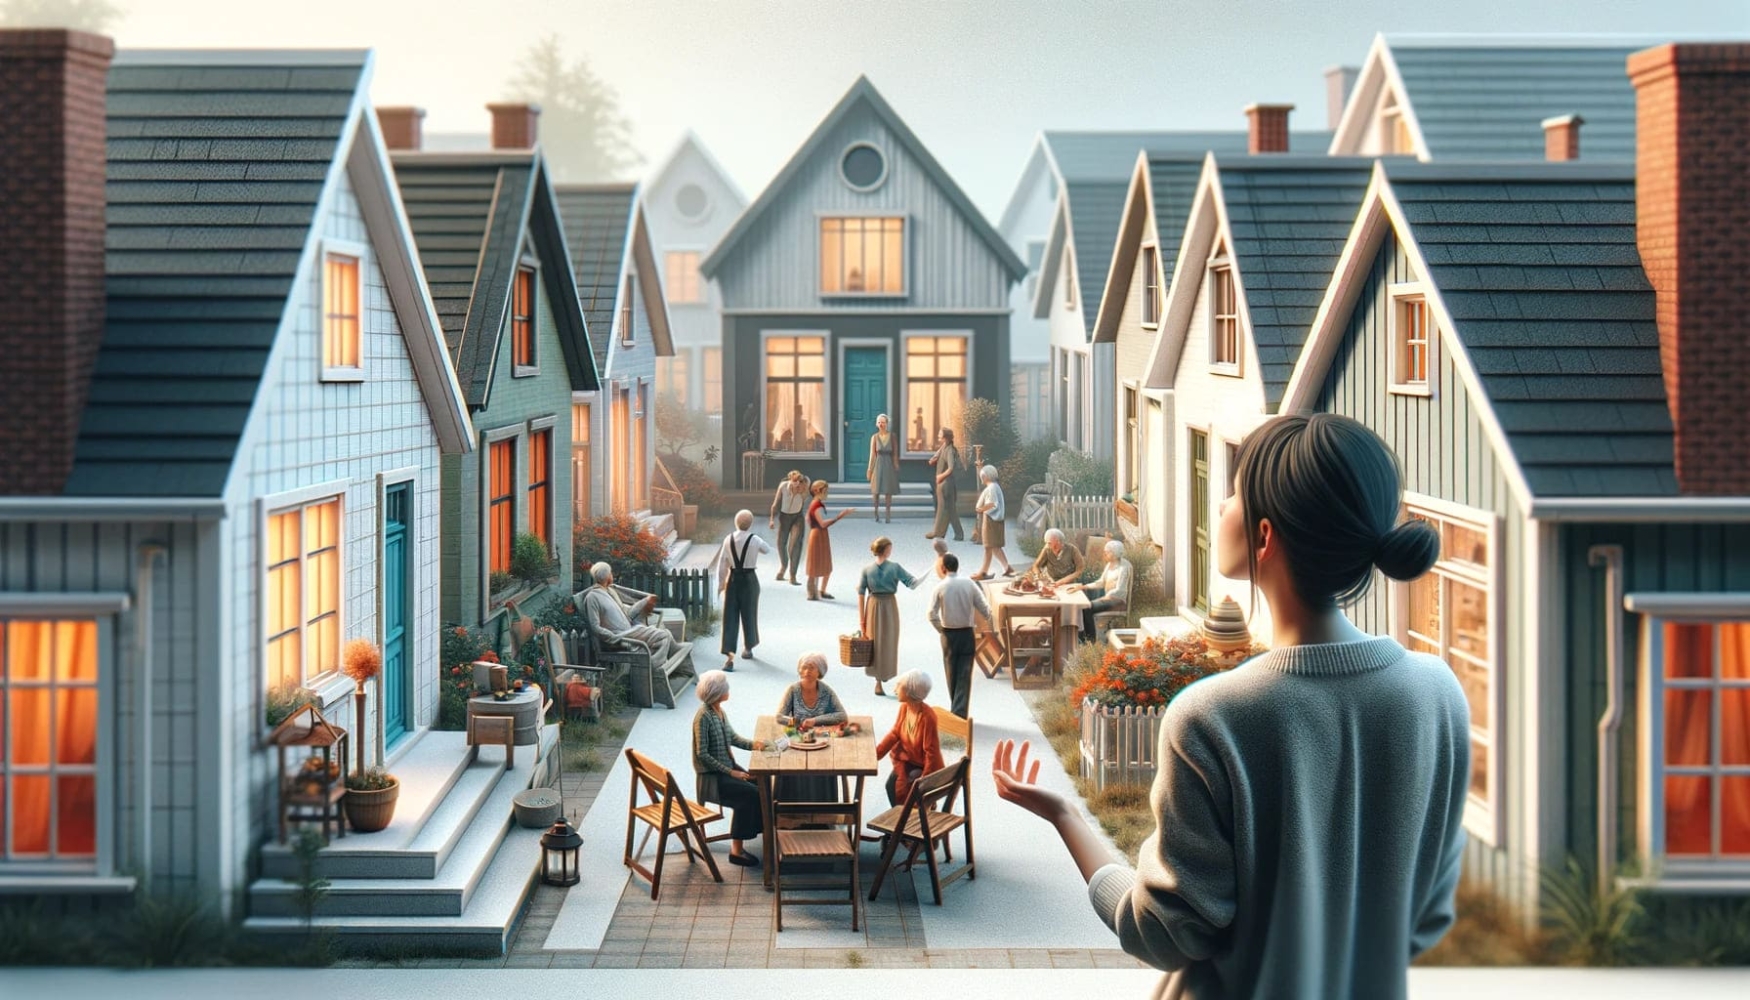 A quaint neighborhood scene featuring small houses with people engaged in various activities around them. In the foreground, a woman is standing with an expression of curiosity and wonder on her face, as if asking herself, "Who are they?". The setting is peaceful and inviting, capturing the essence of community life. The architecture of the houses suggests a cozy, welcoming atmosphere.